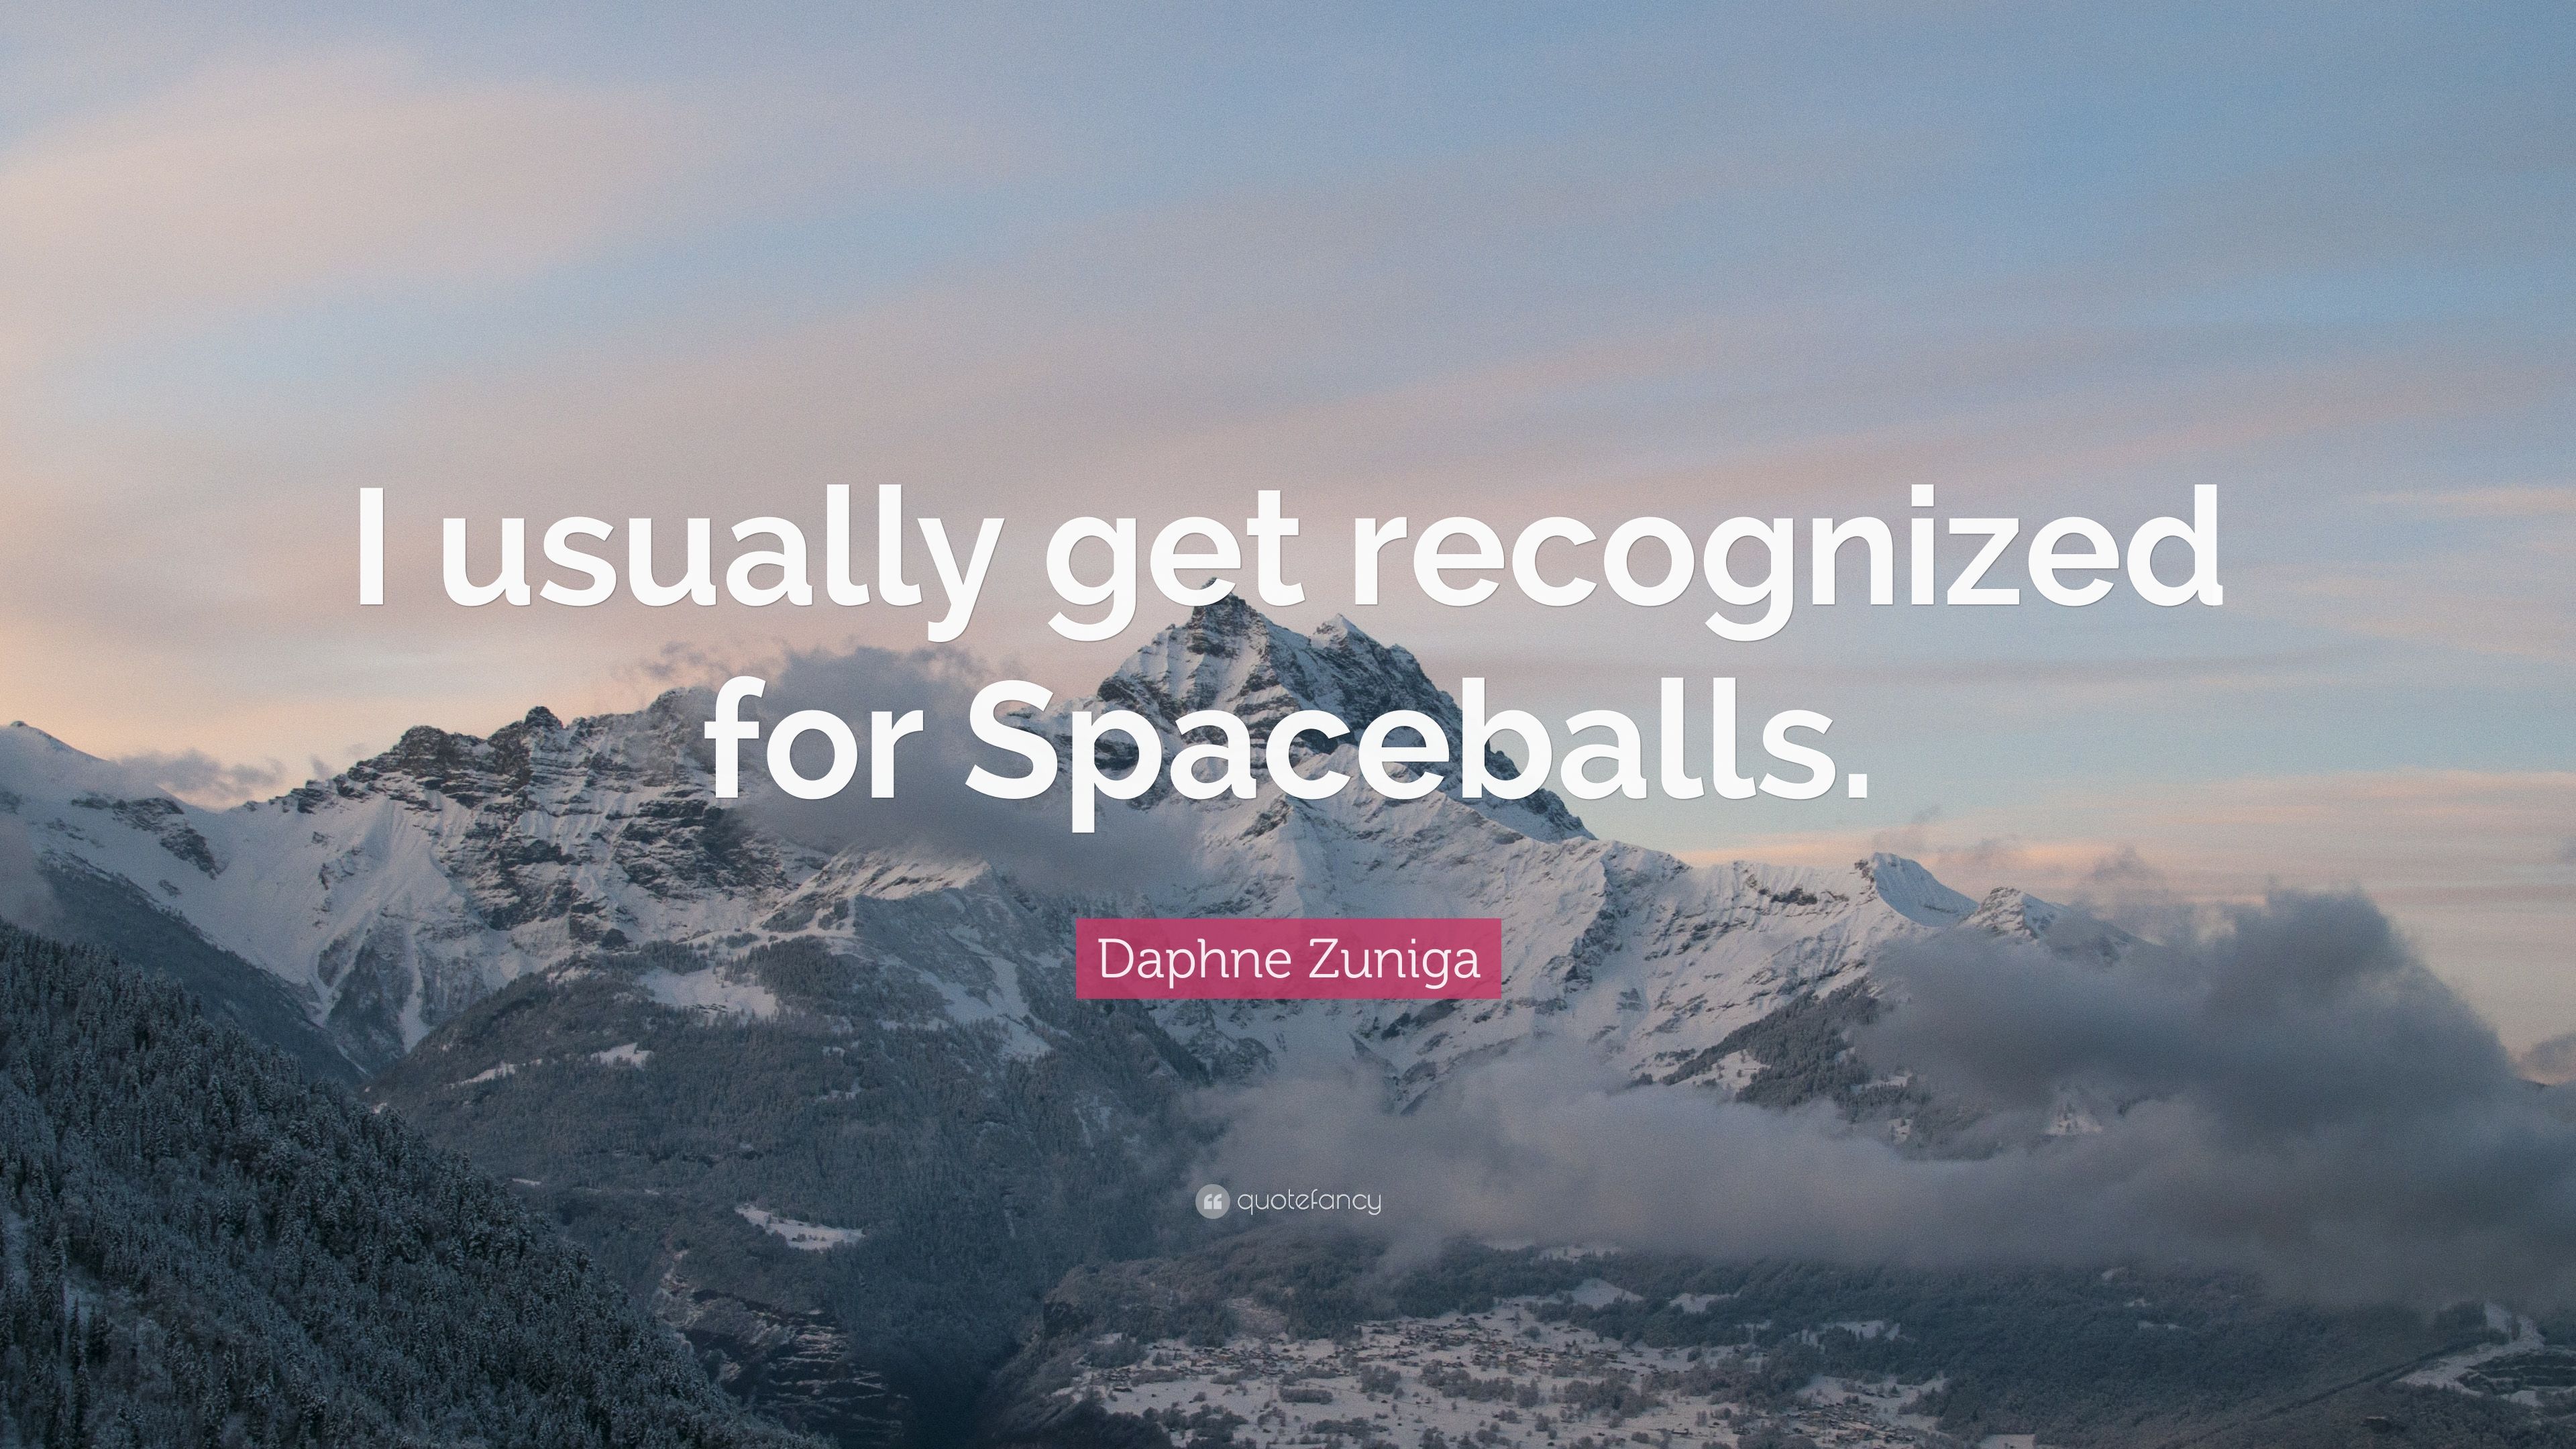 Daphne Zuniga Quote: “I usually get recognized for Spaceballs.” 7